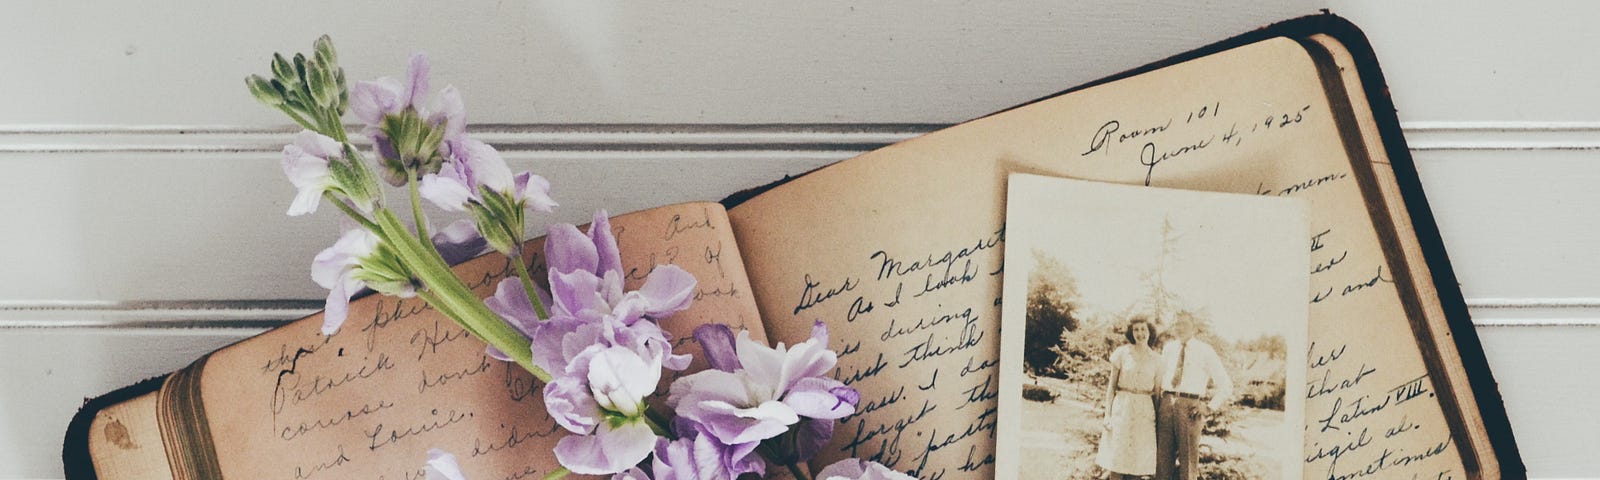 handwritten journal with flowers and an old photo